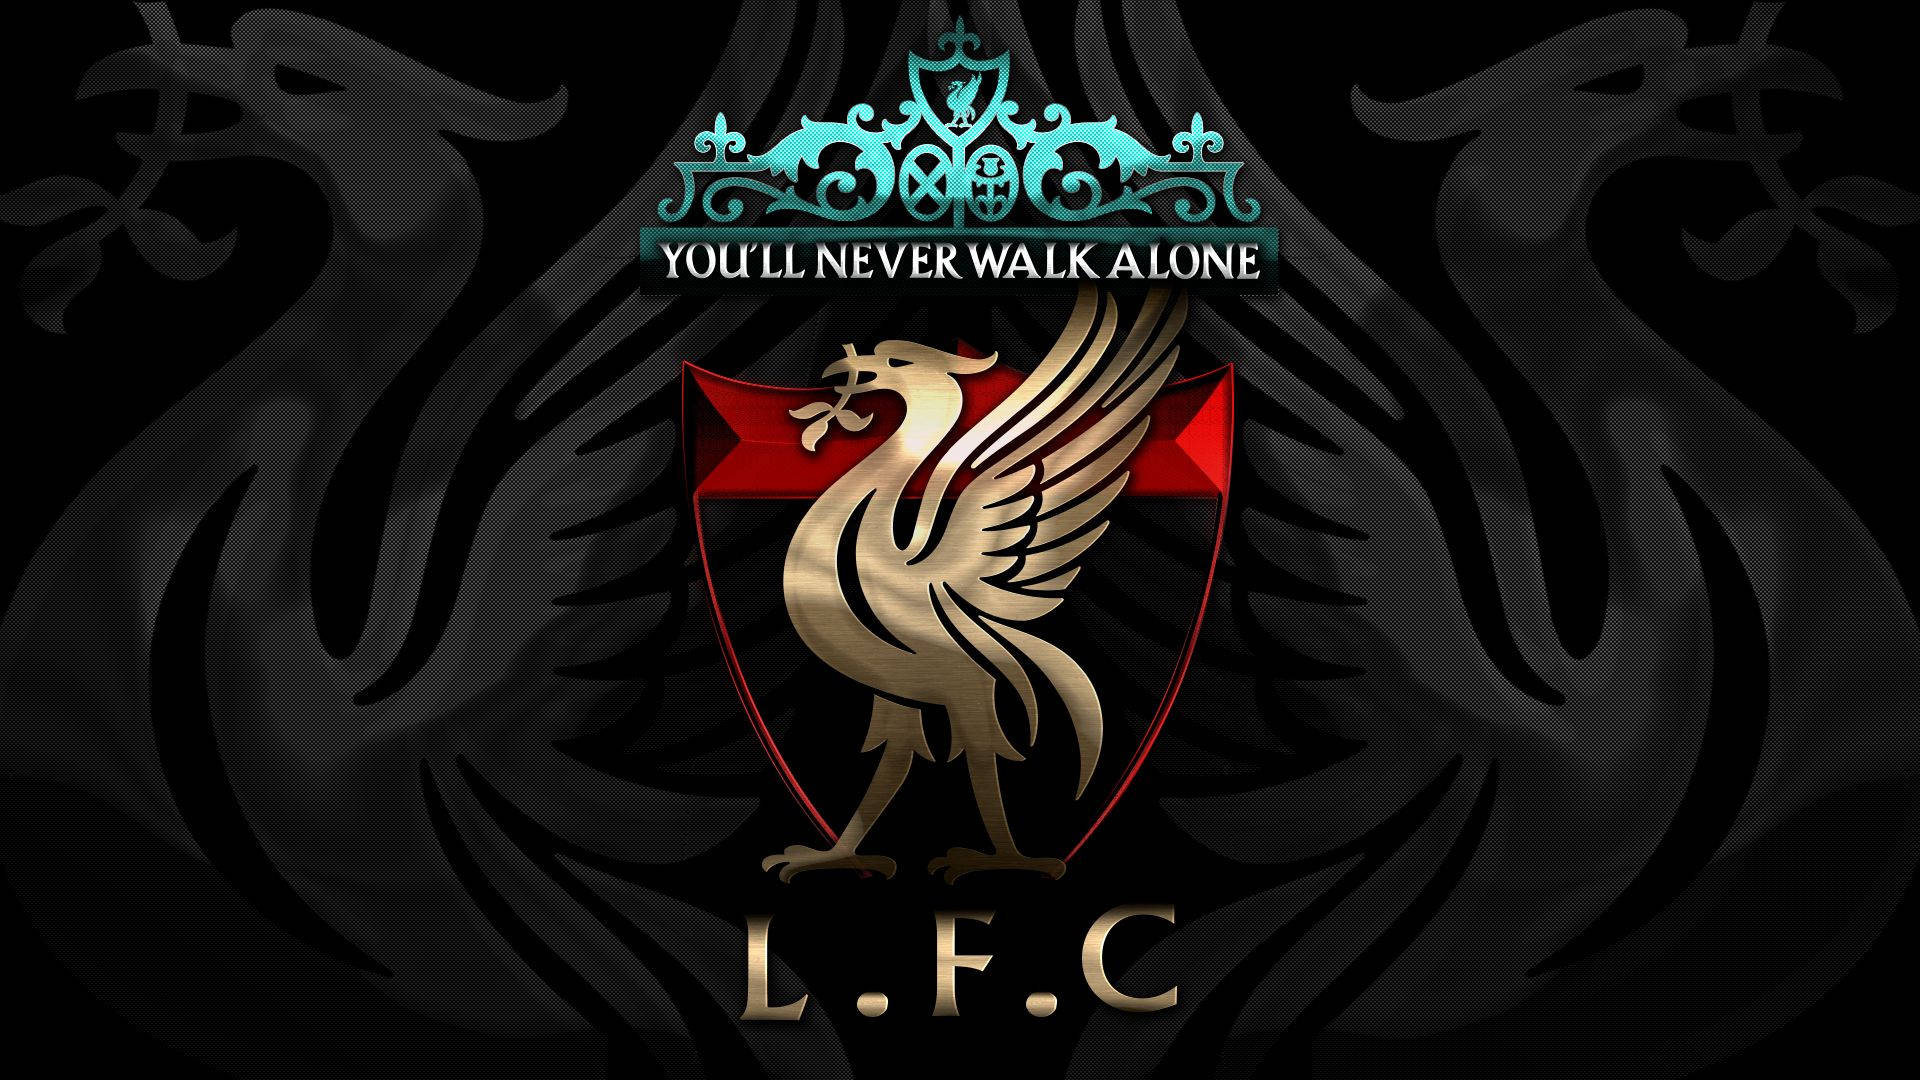 Best Liverpool FC Wallpaper engine Live Wallpapers - YouTube